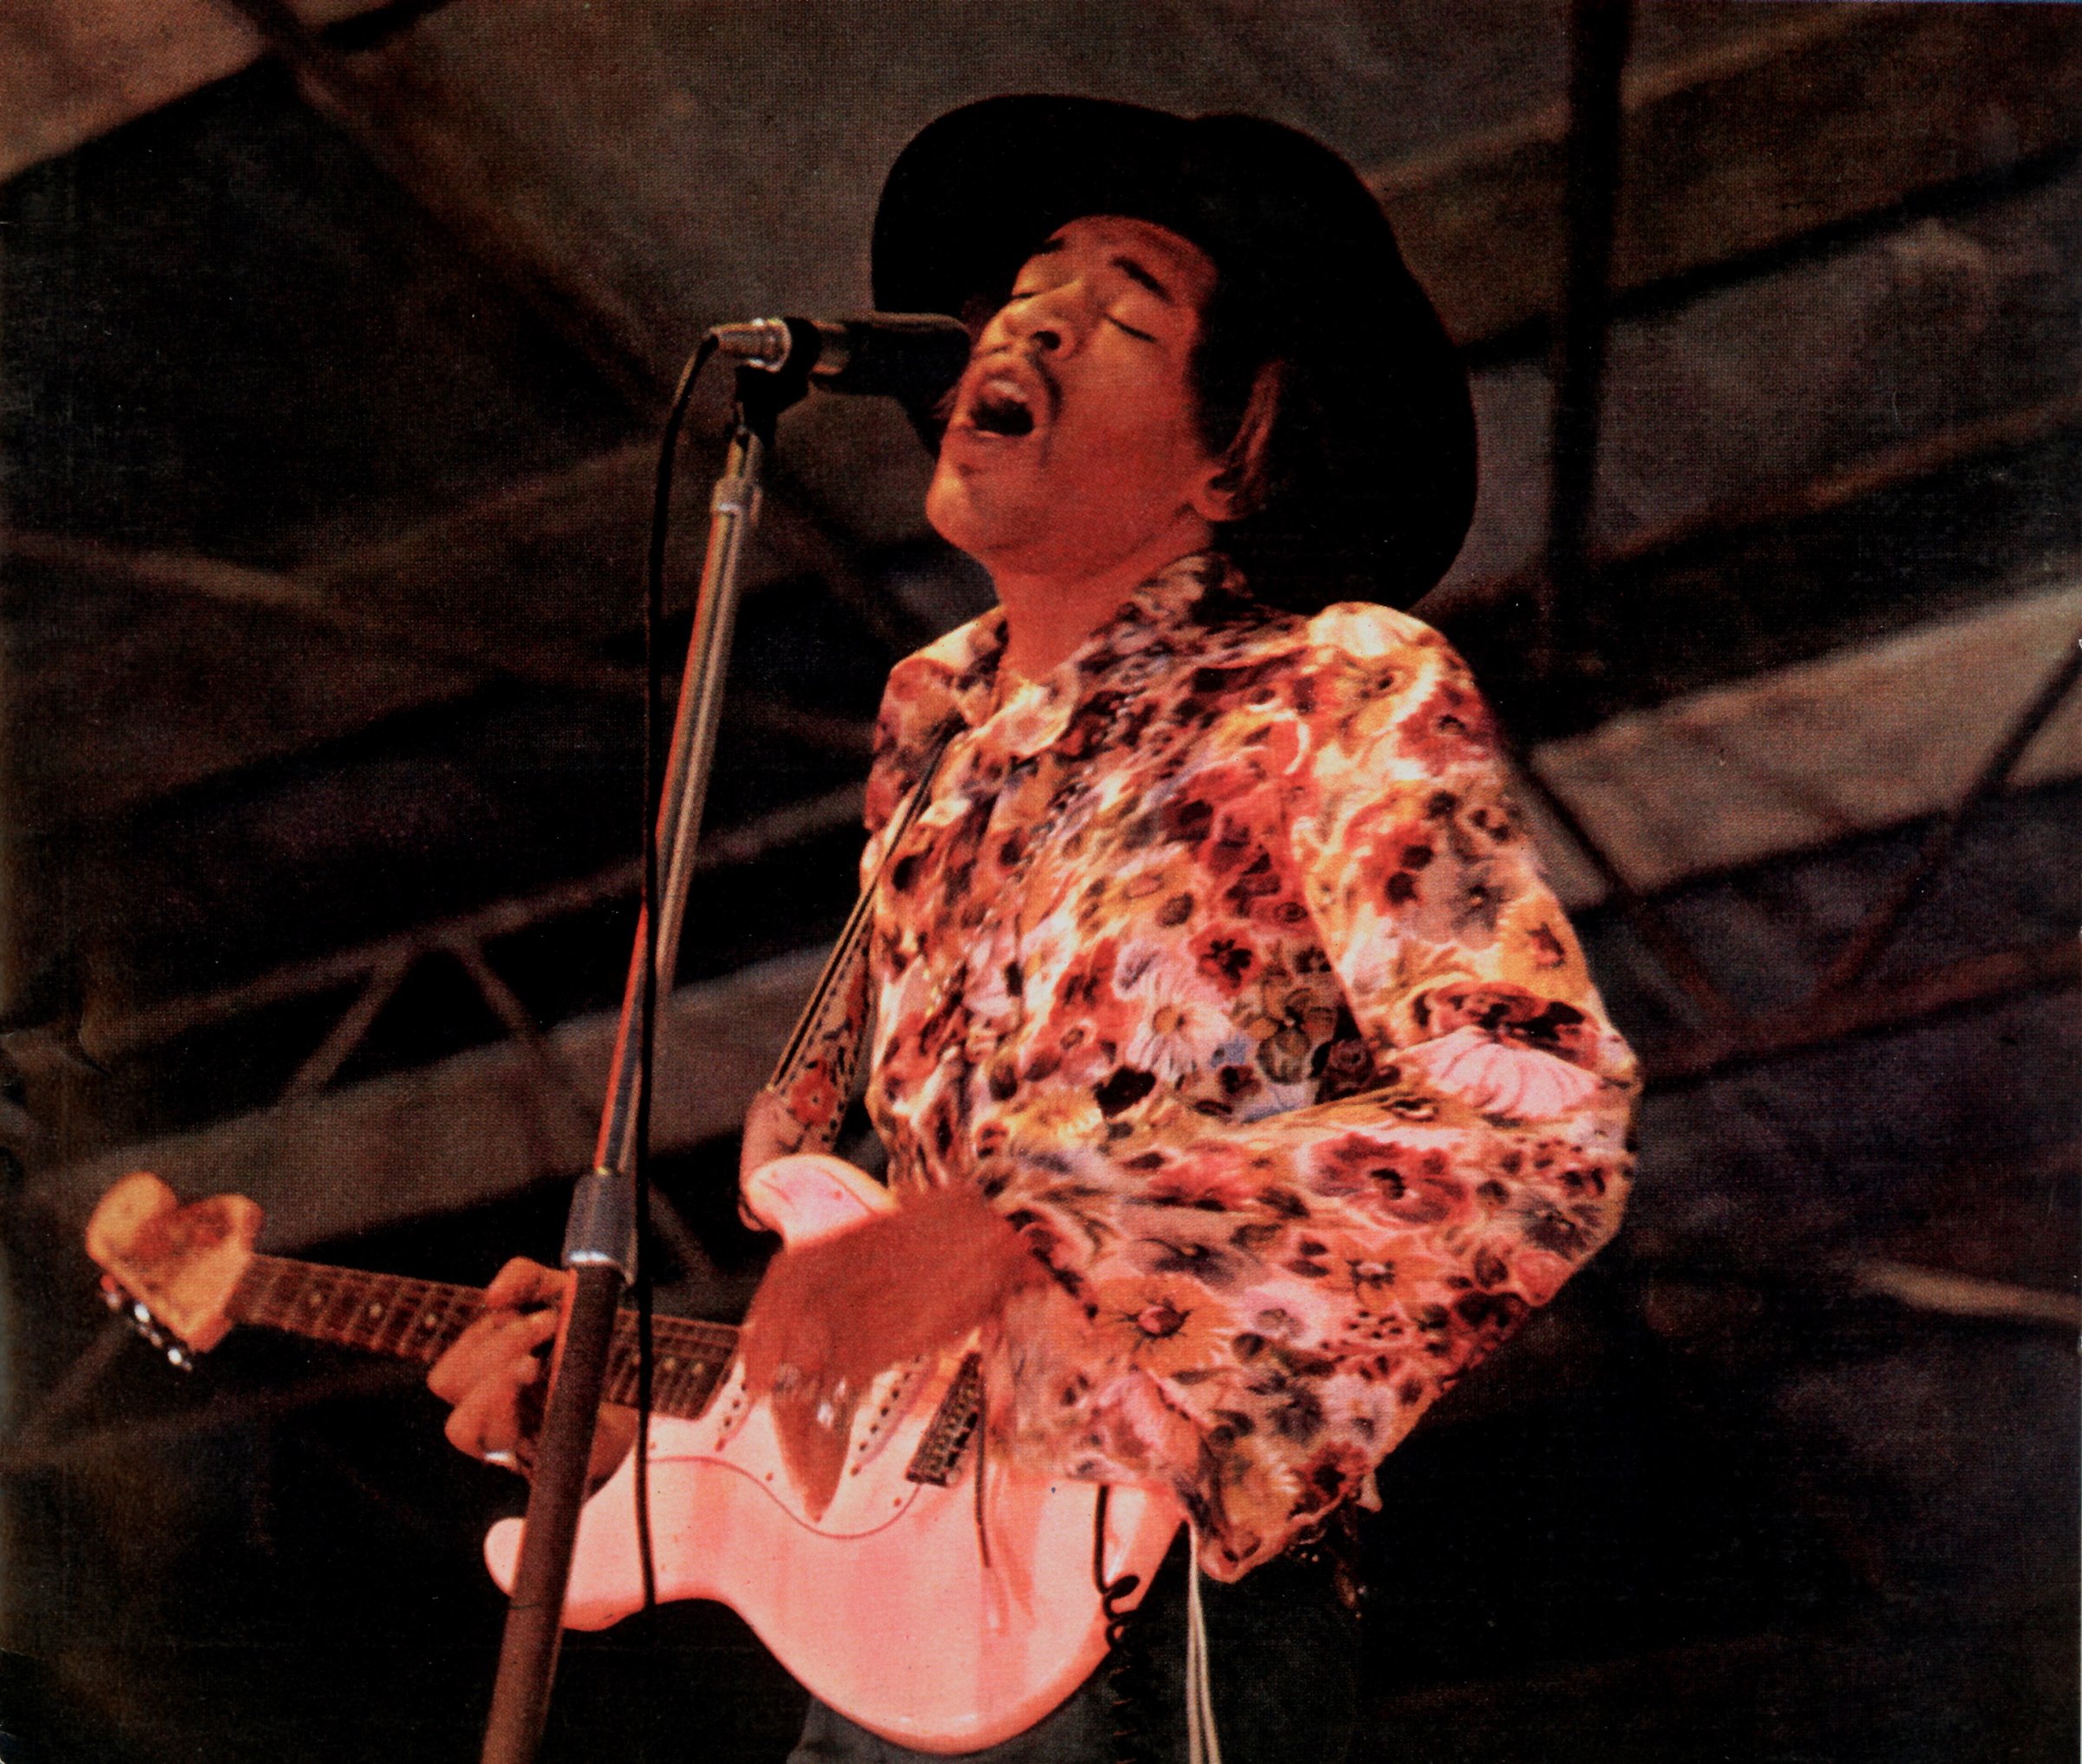 Jimi Hendrix, who came up behind the likes of Bob Dylan and the Beatles, singing into